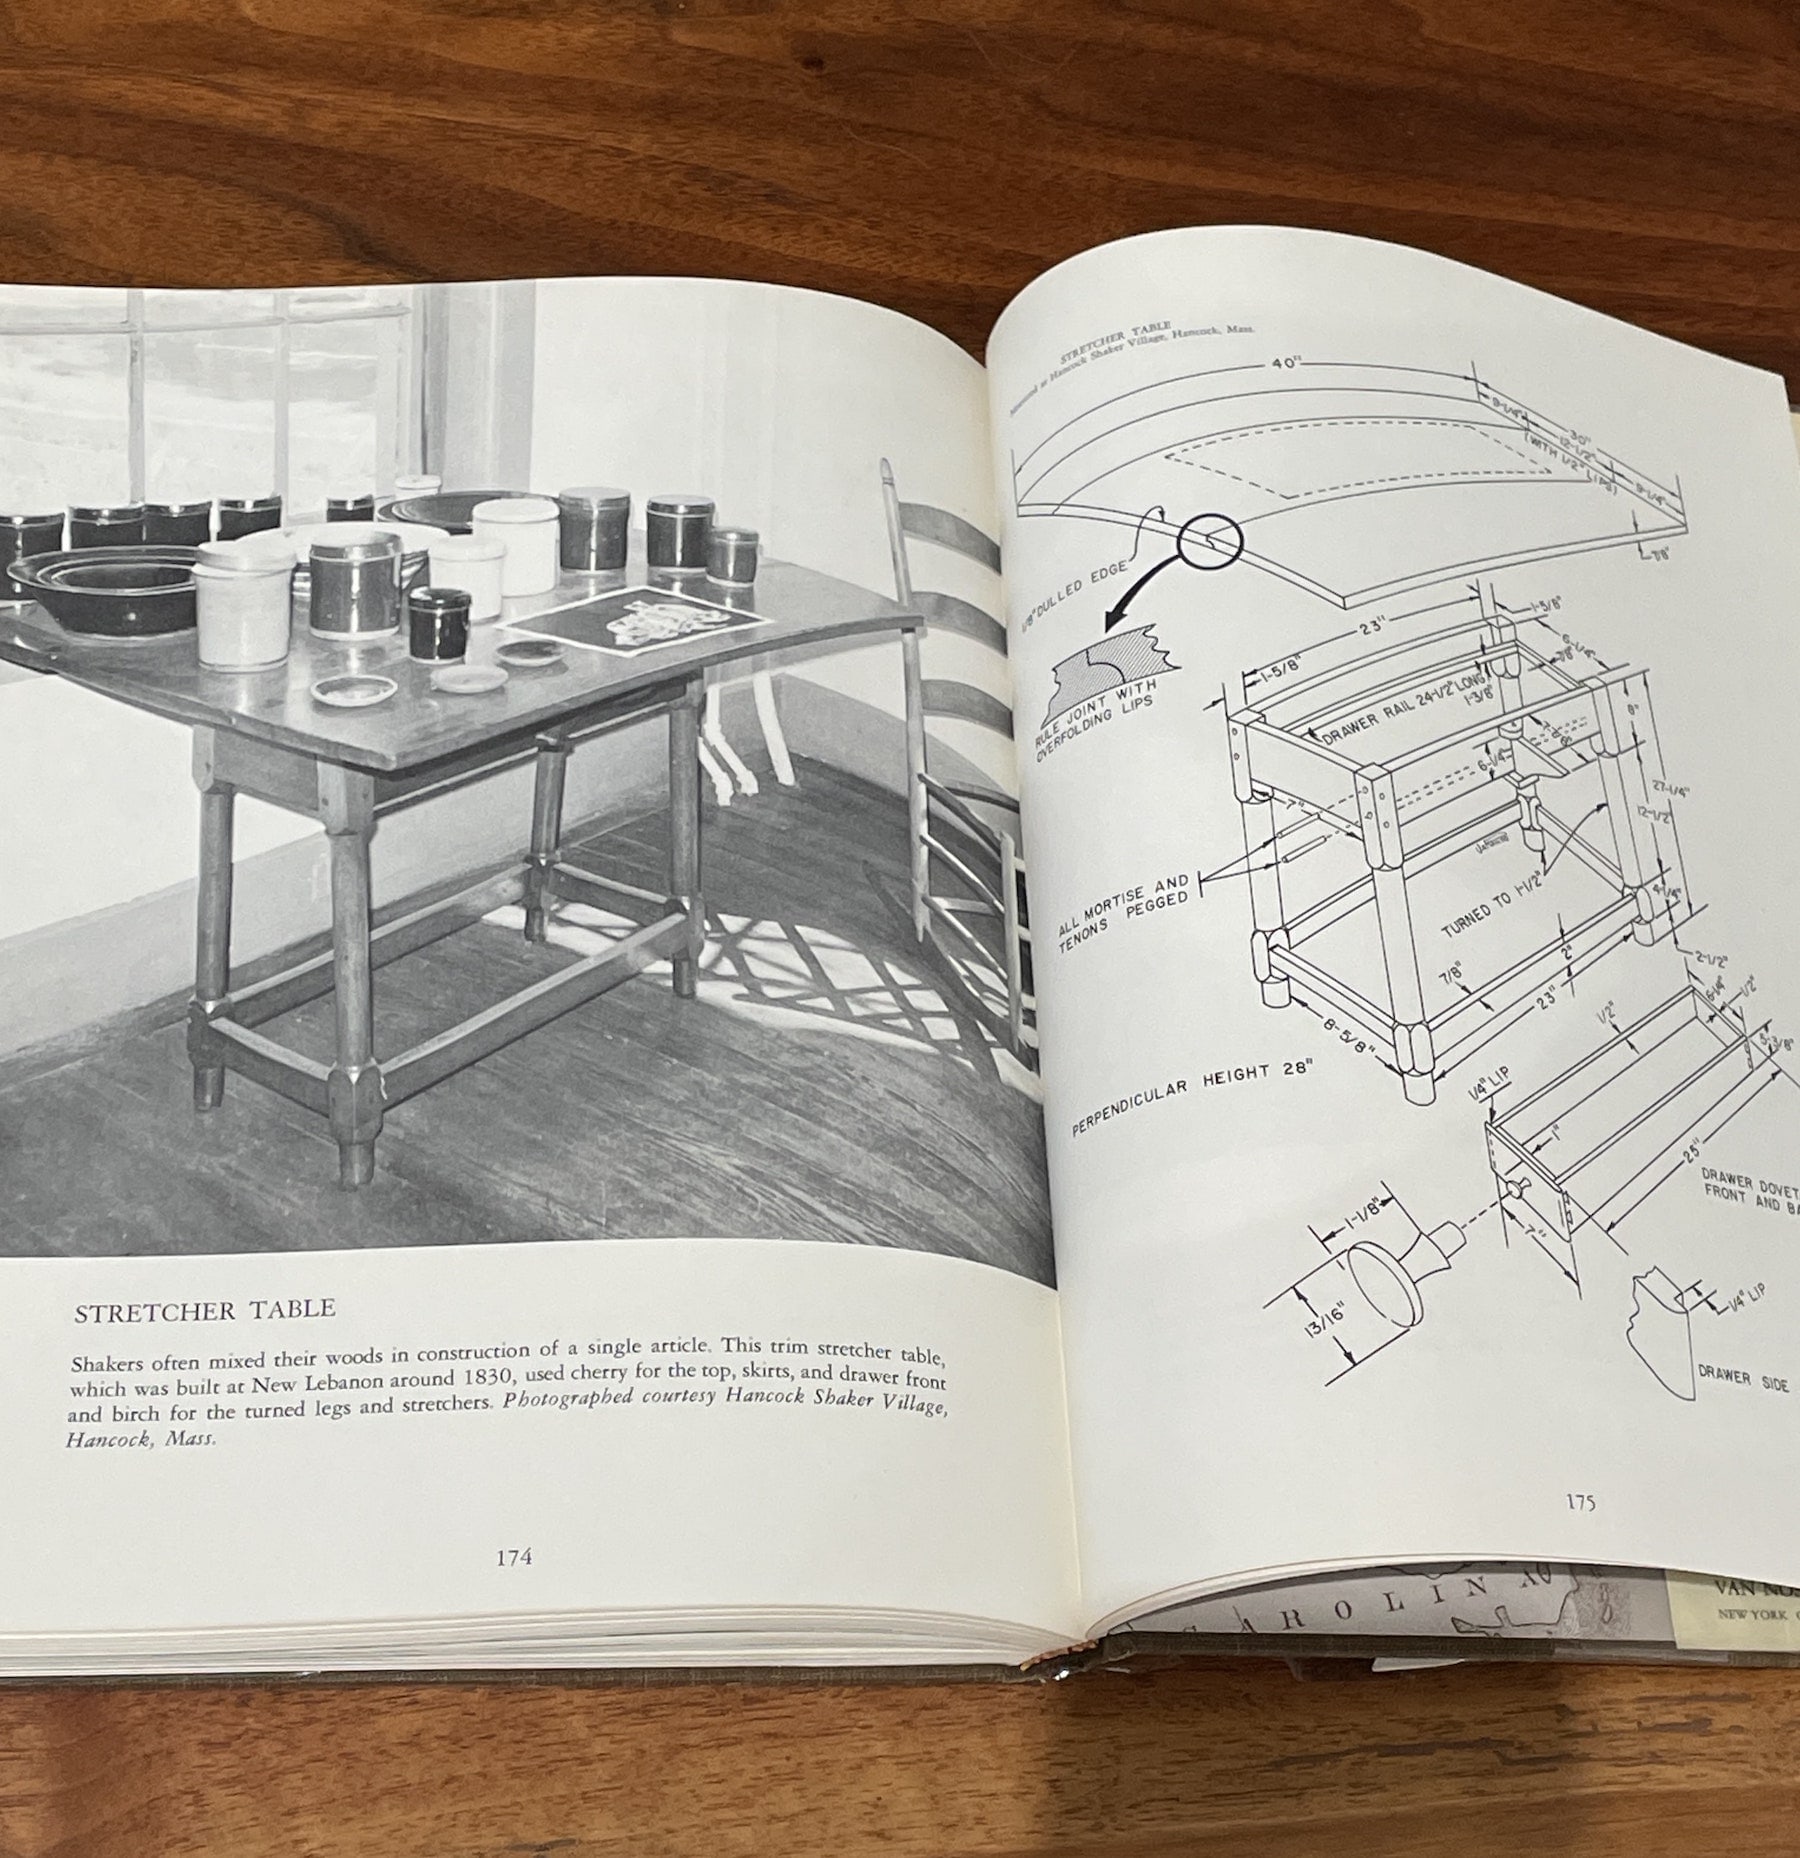 Greyscale photo of stretcher table photographed with diagram of measurements and fabrication notes; from The American Shakers and Their Furniture book